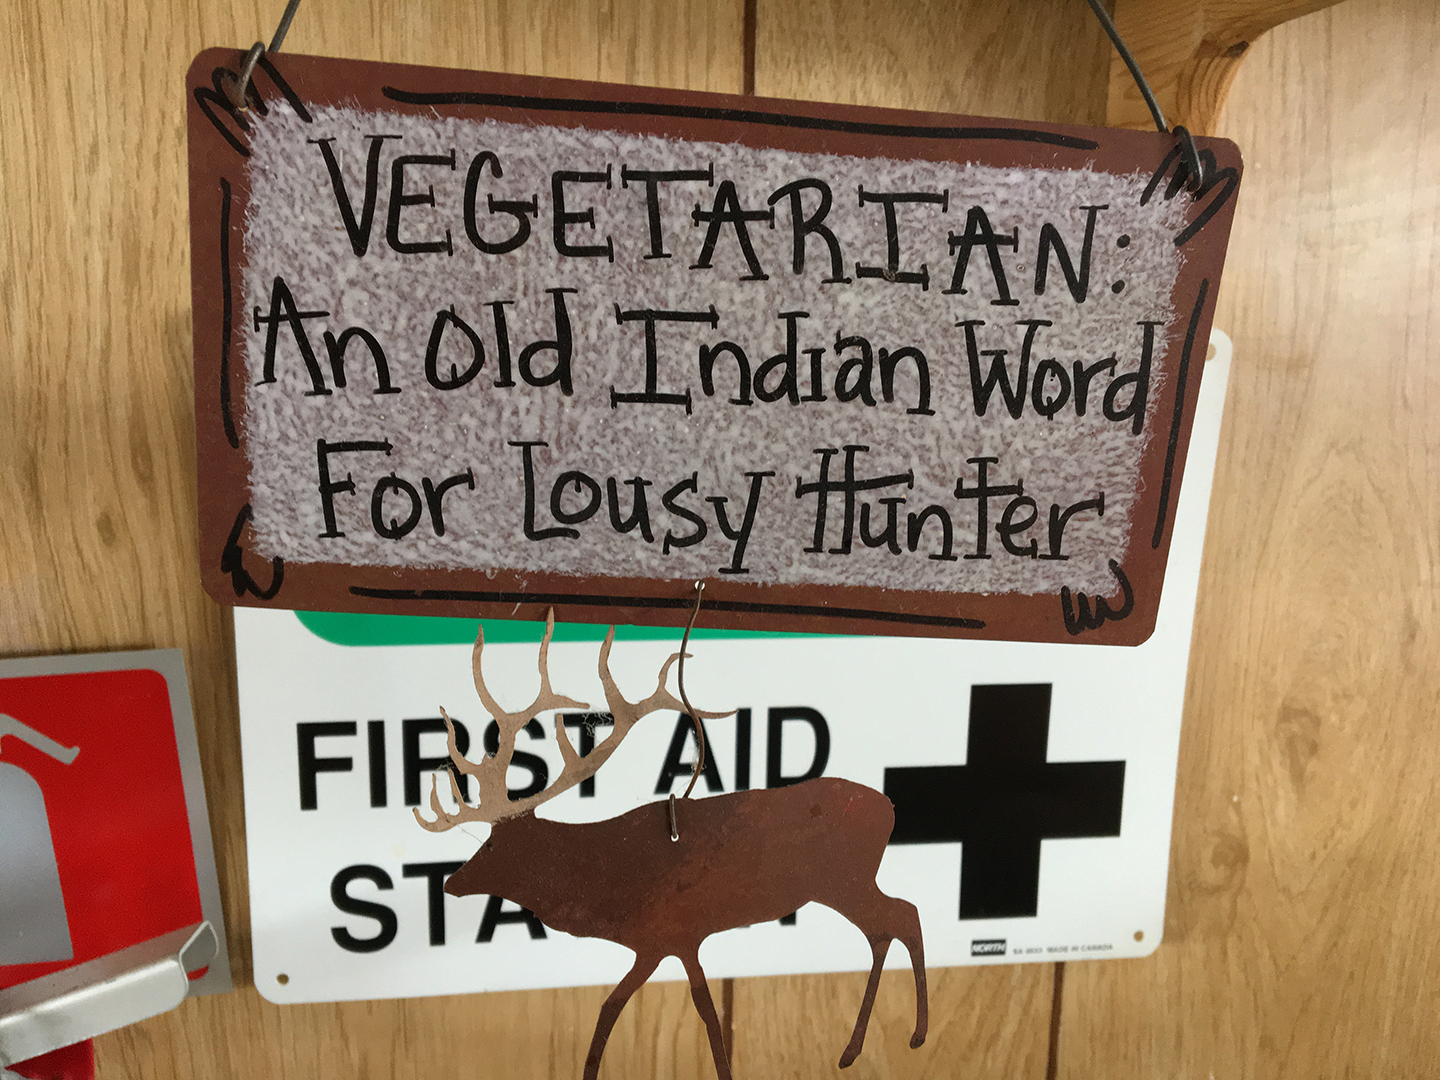 VEGETARIAN: An Old Indian Word For Lousy Hunter